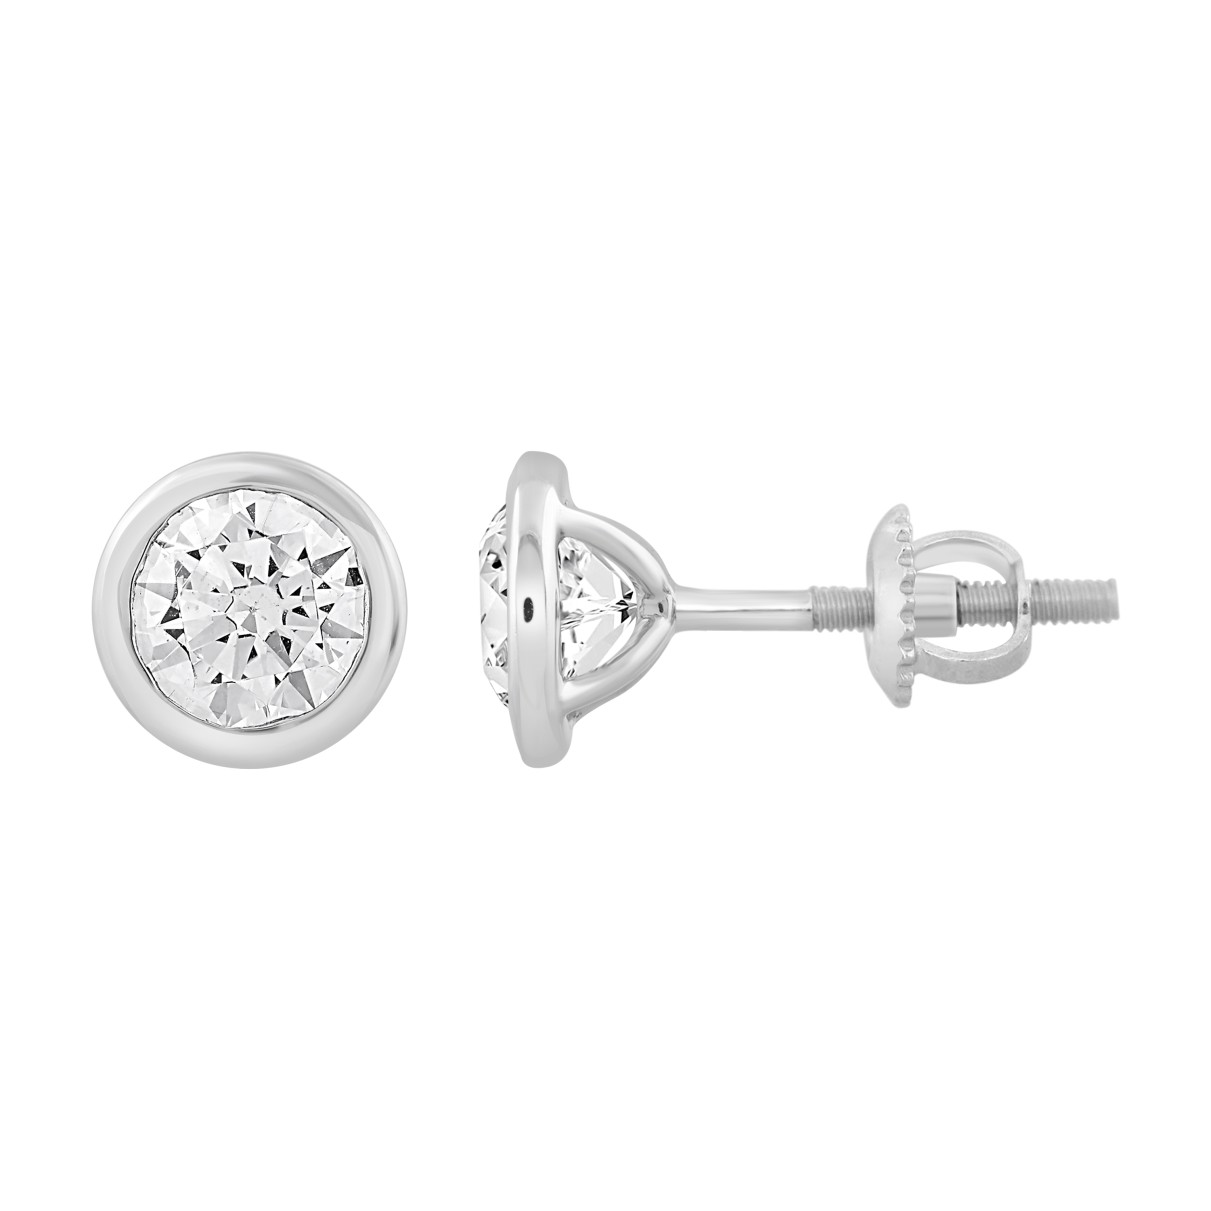 LADIES SOLITAIRE EARRINGS  3CT ROUND DIAMOND 14K WHITE GOLD